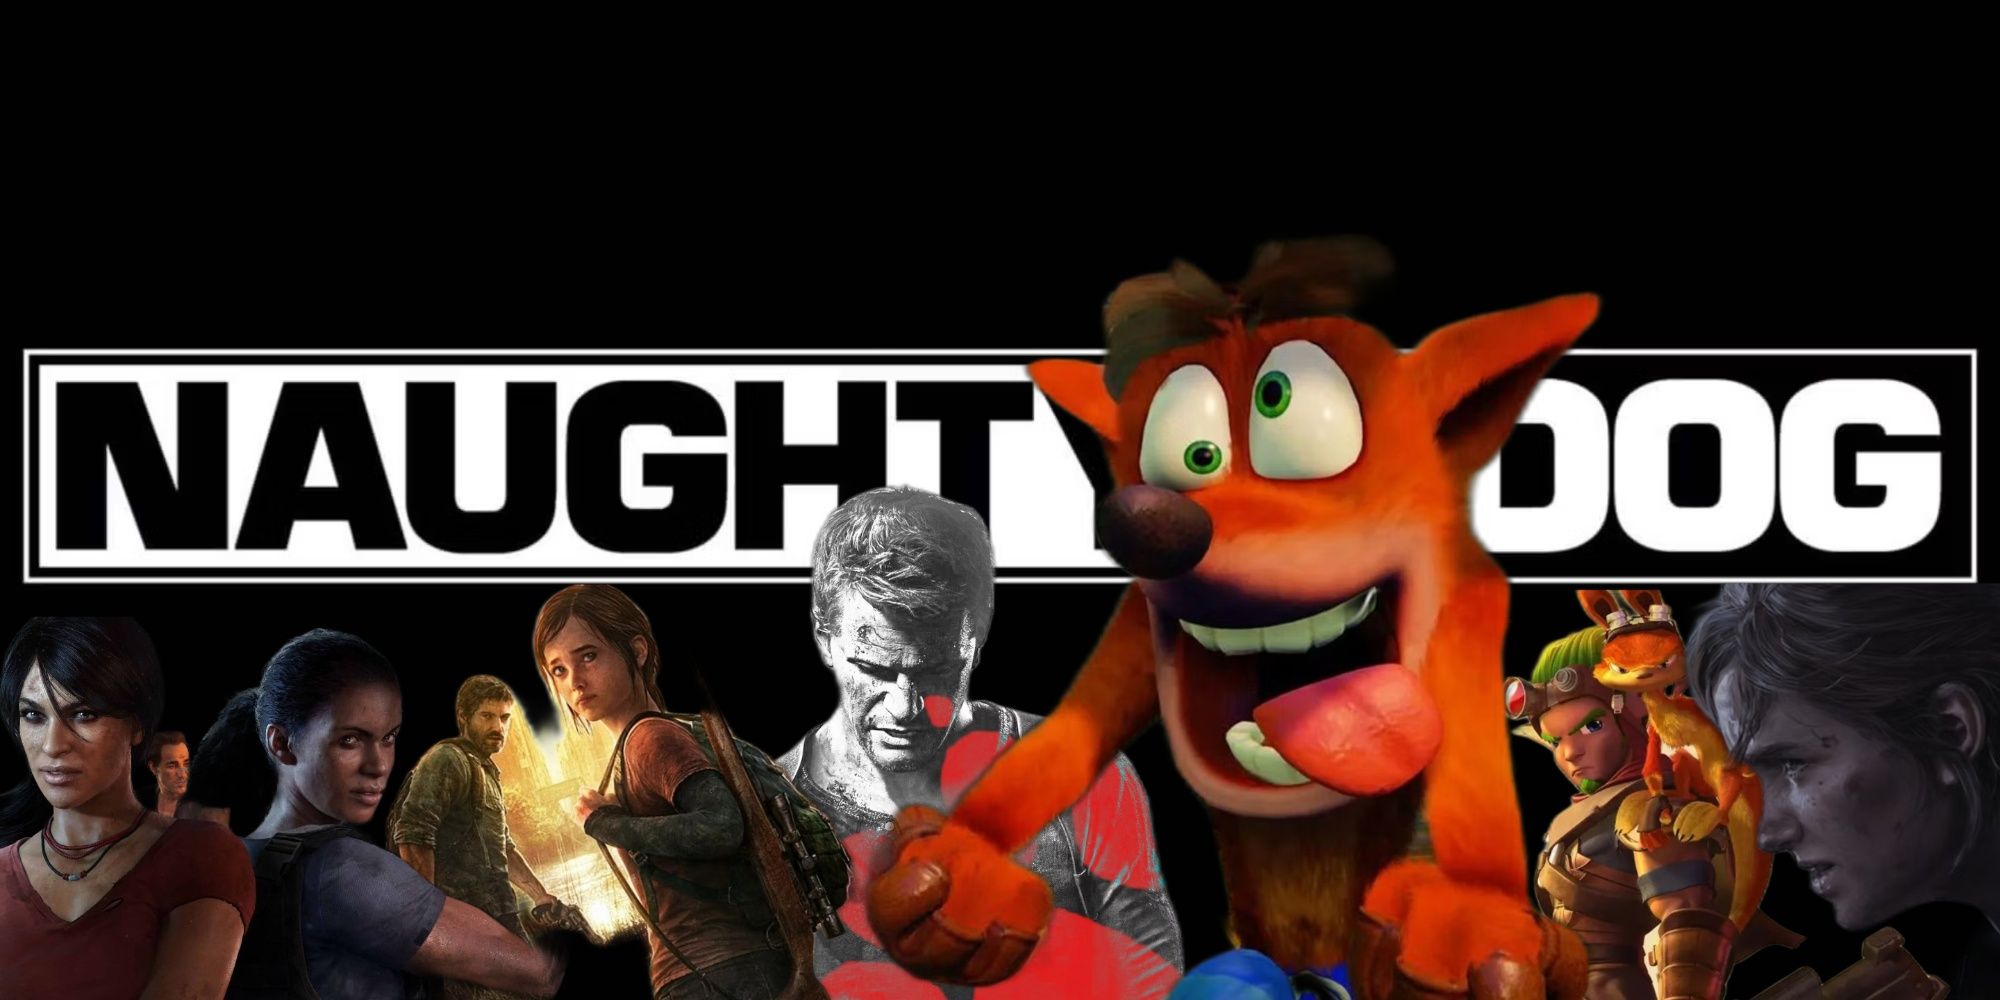 The Naughty Dog company logo in the background as characters from Uncharted, The Last of Us, Crash Bandicoot, and Jak and Daxter populate the screen.